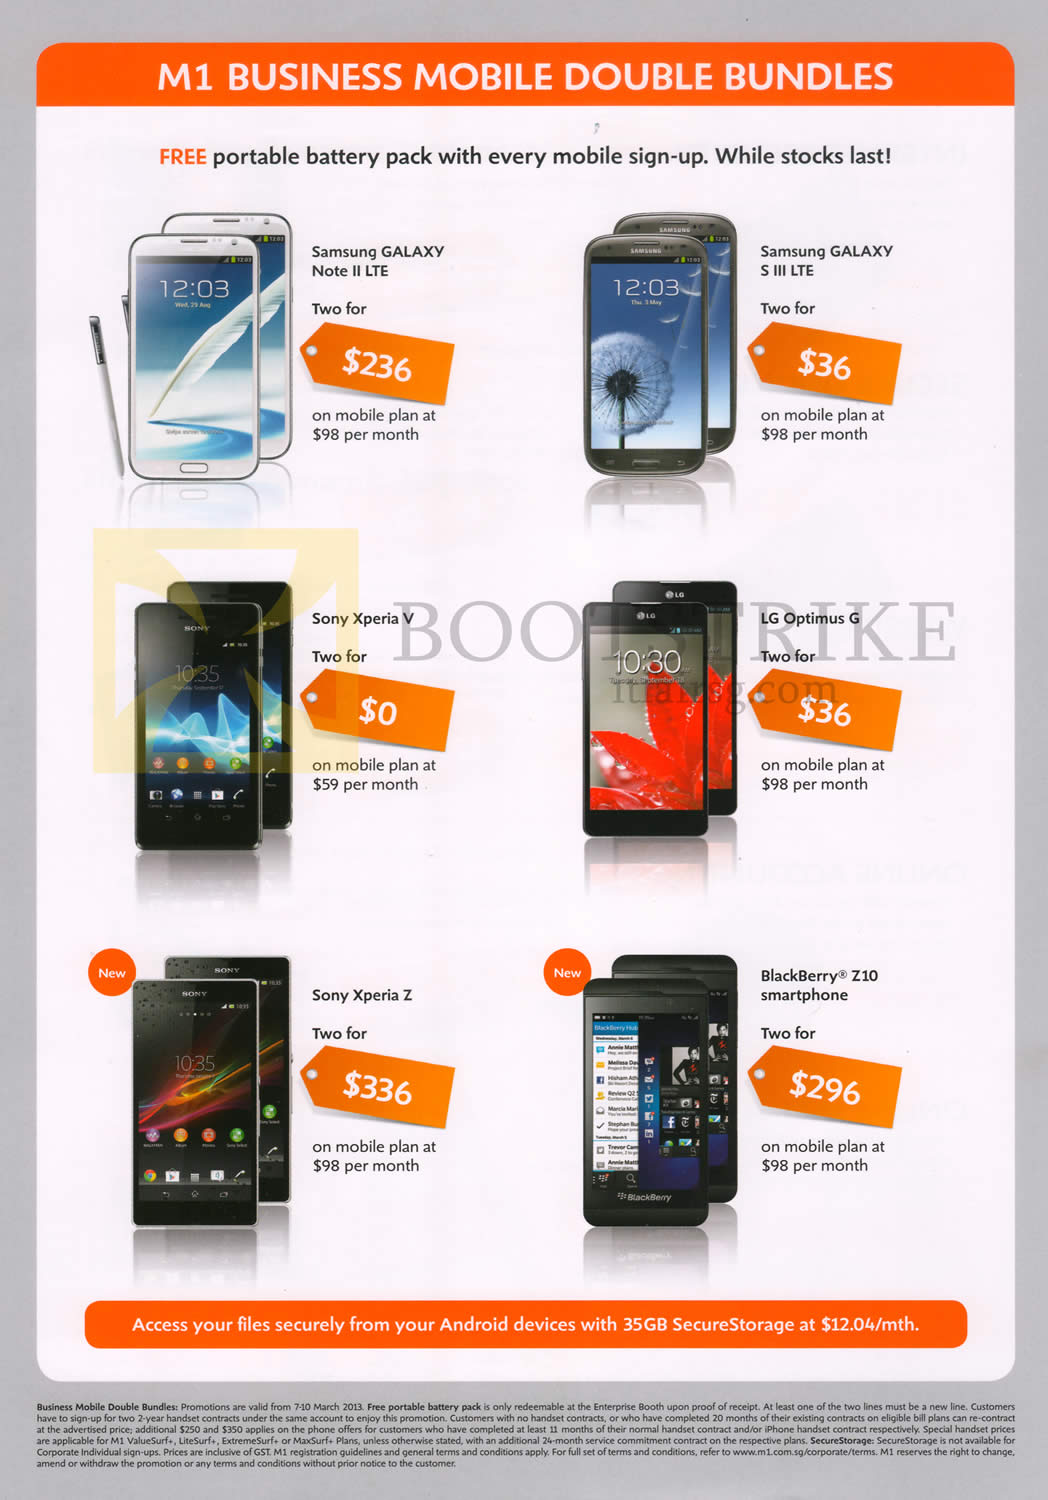 IT SHOW 2013 price list image brochure of M1 Business Mobile Samsung Galaxy Note II LTE, S III LTE, Sony Xperia V, Sony Xperia Z, LG Optimus G, Blackberry Z10